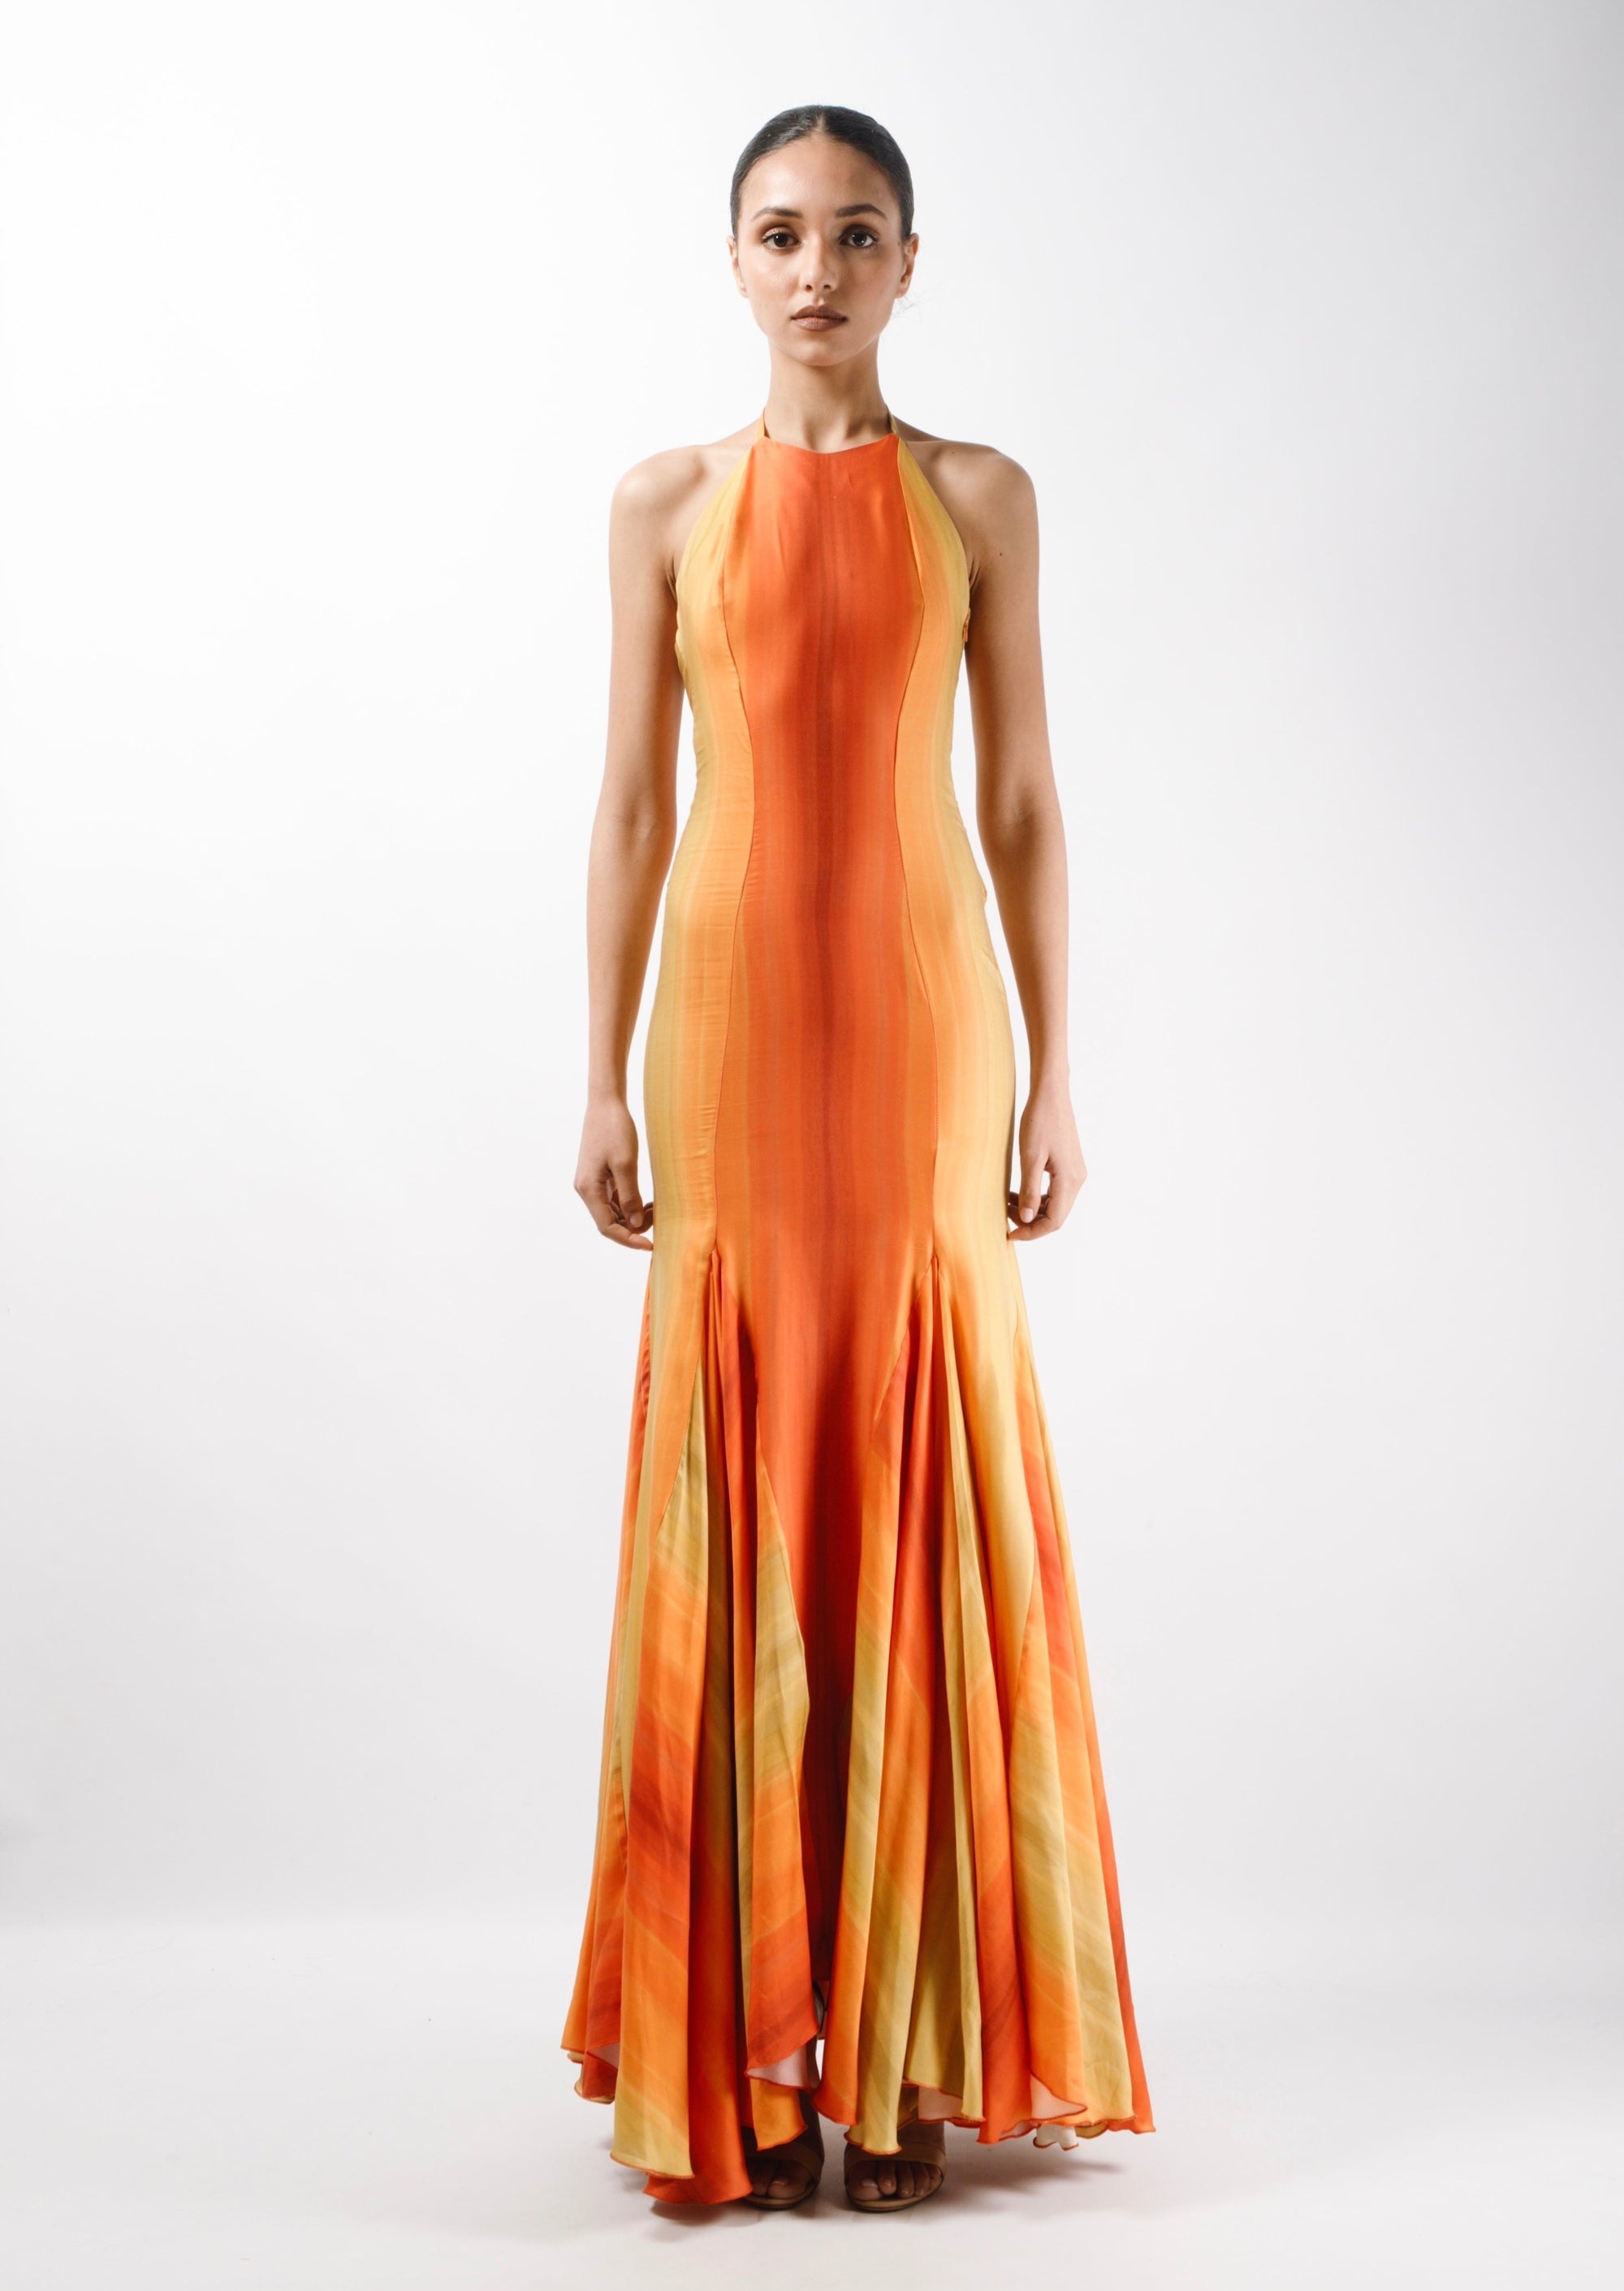 Maxi Gown Dress with long triangle godets and an American neckline with self tie straps. The Dress features an open back - front